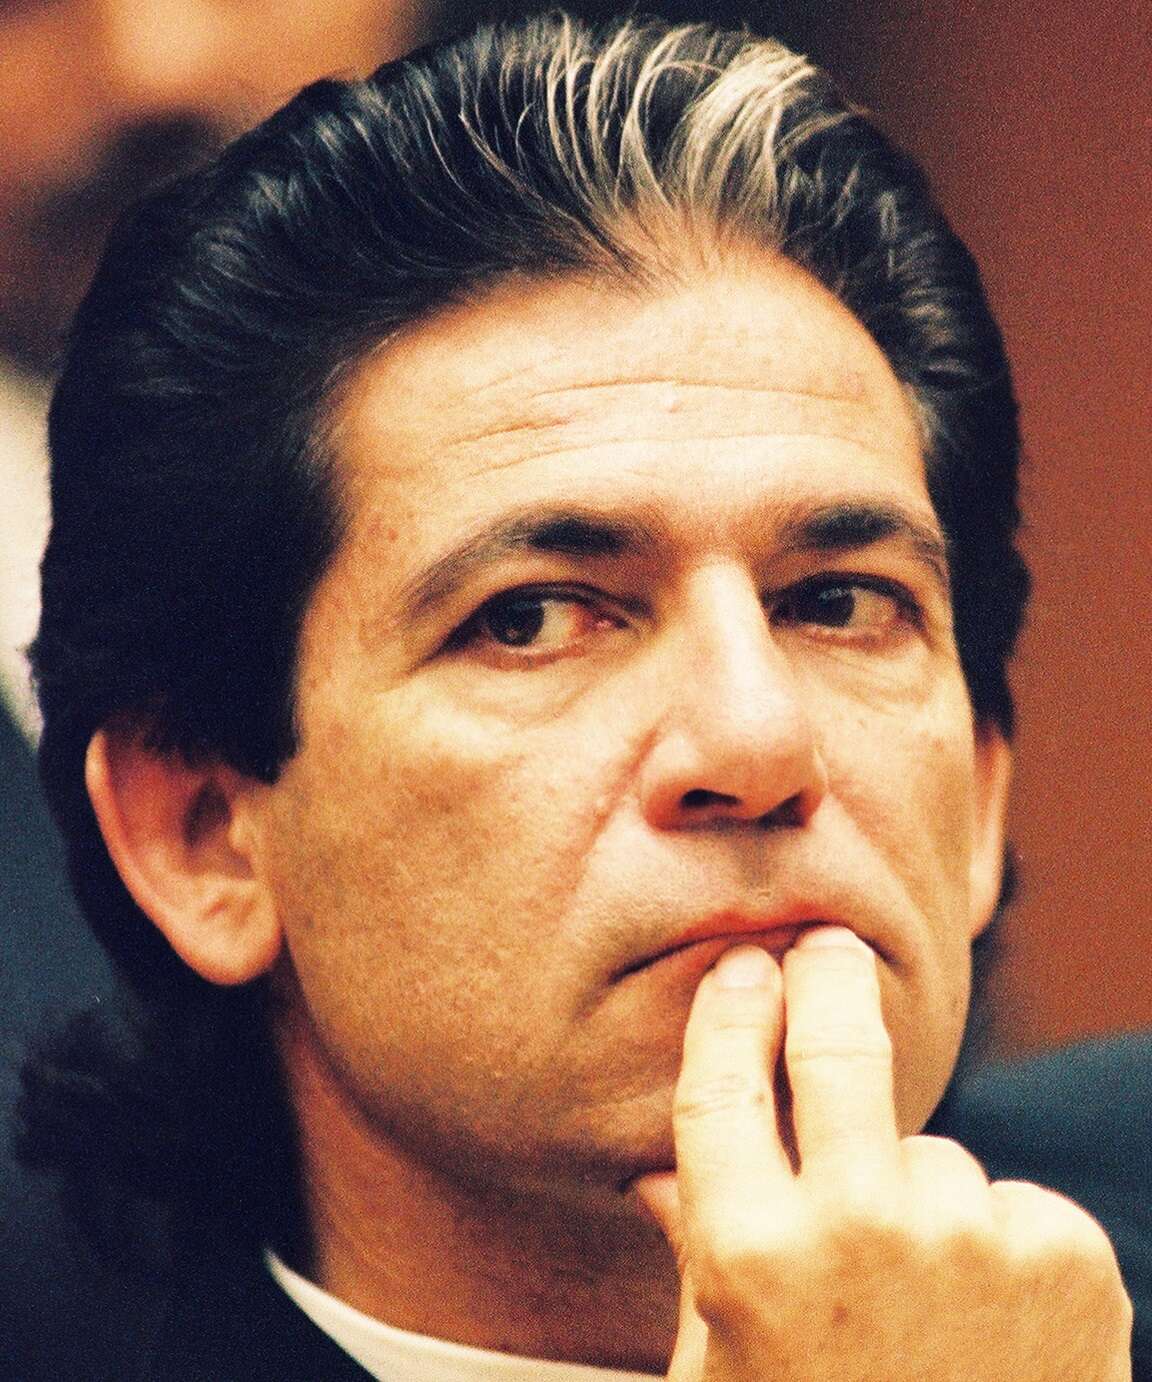 Robert Kardashian is see during a preliminary hearing during the O.J. Simpson murder trial in 1994